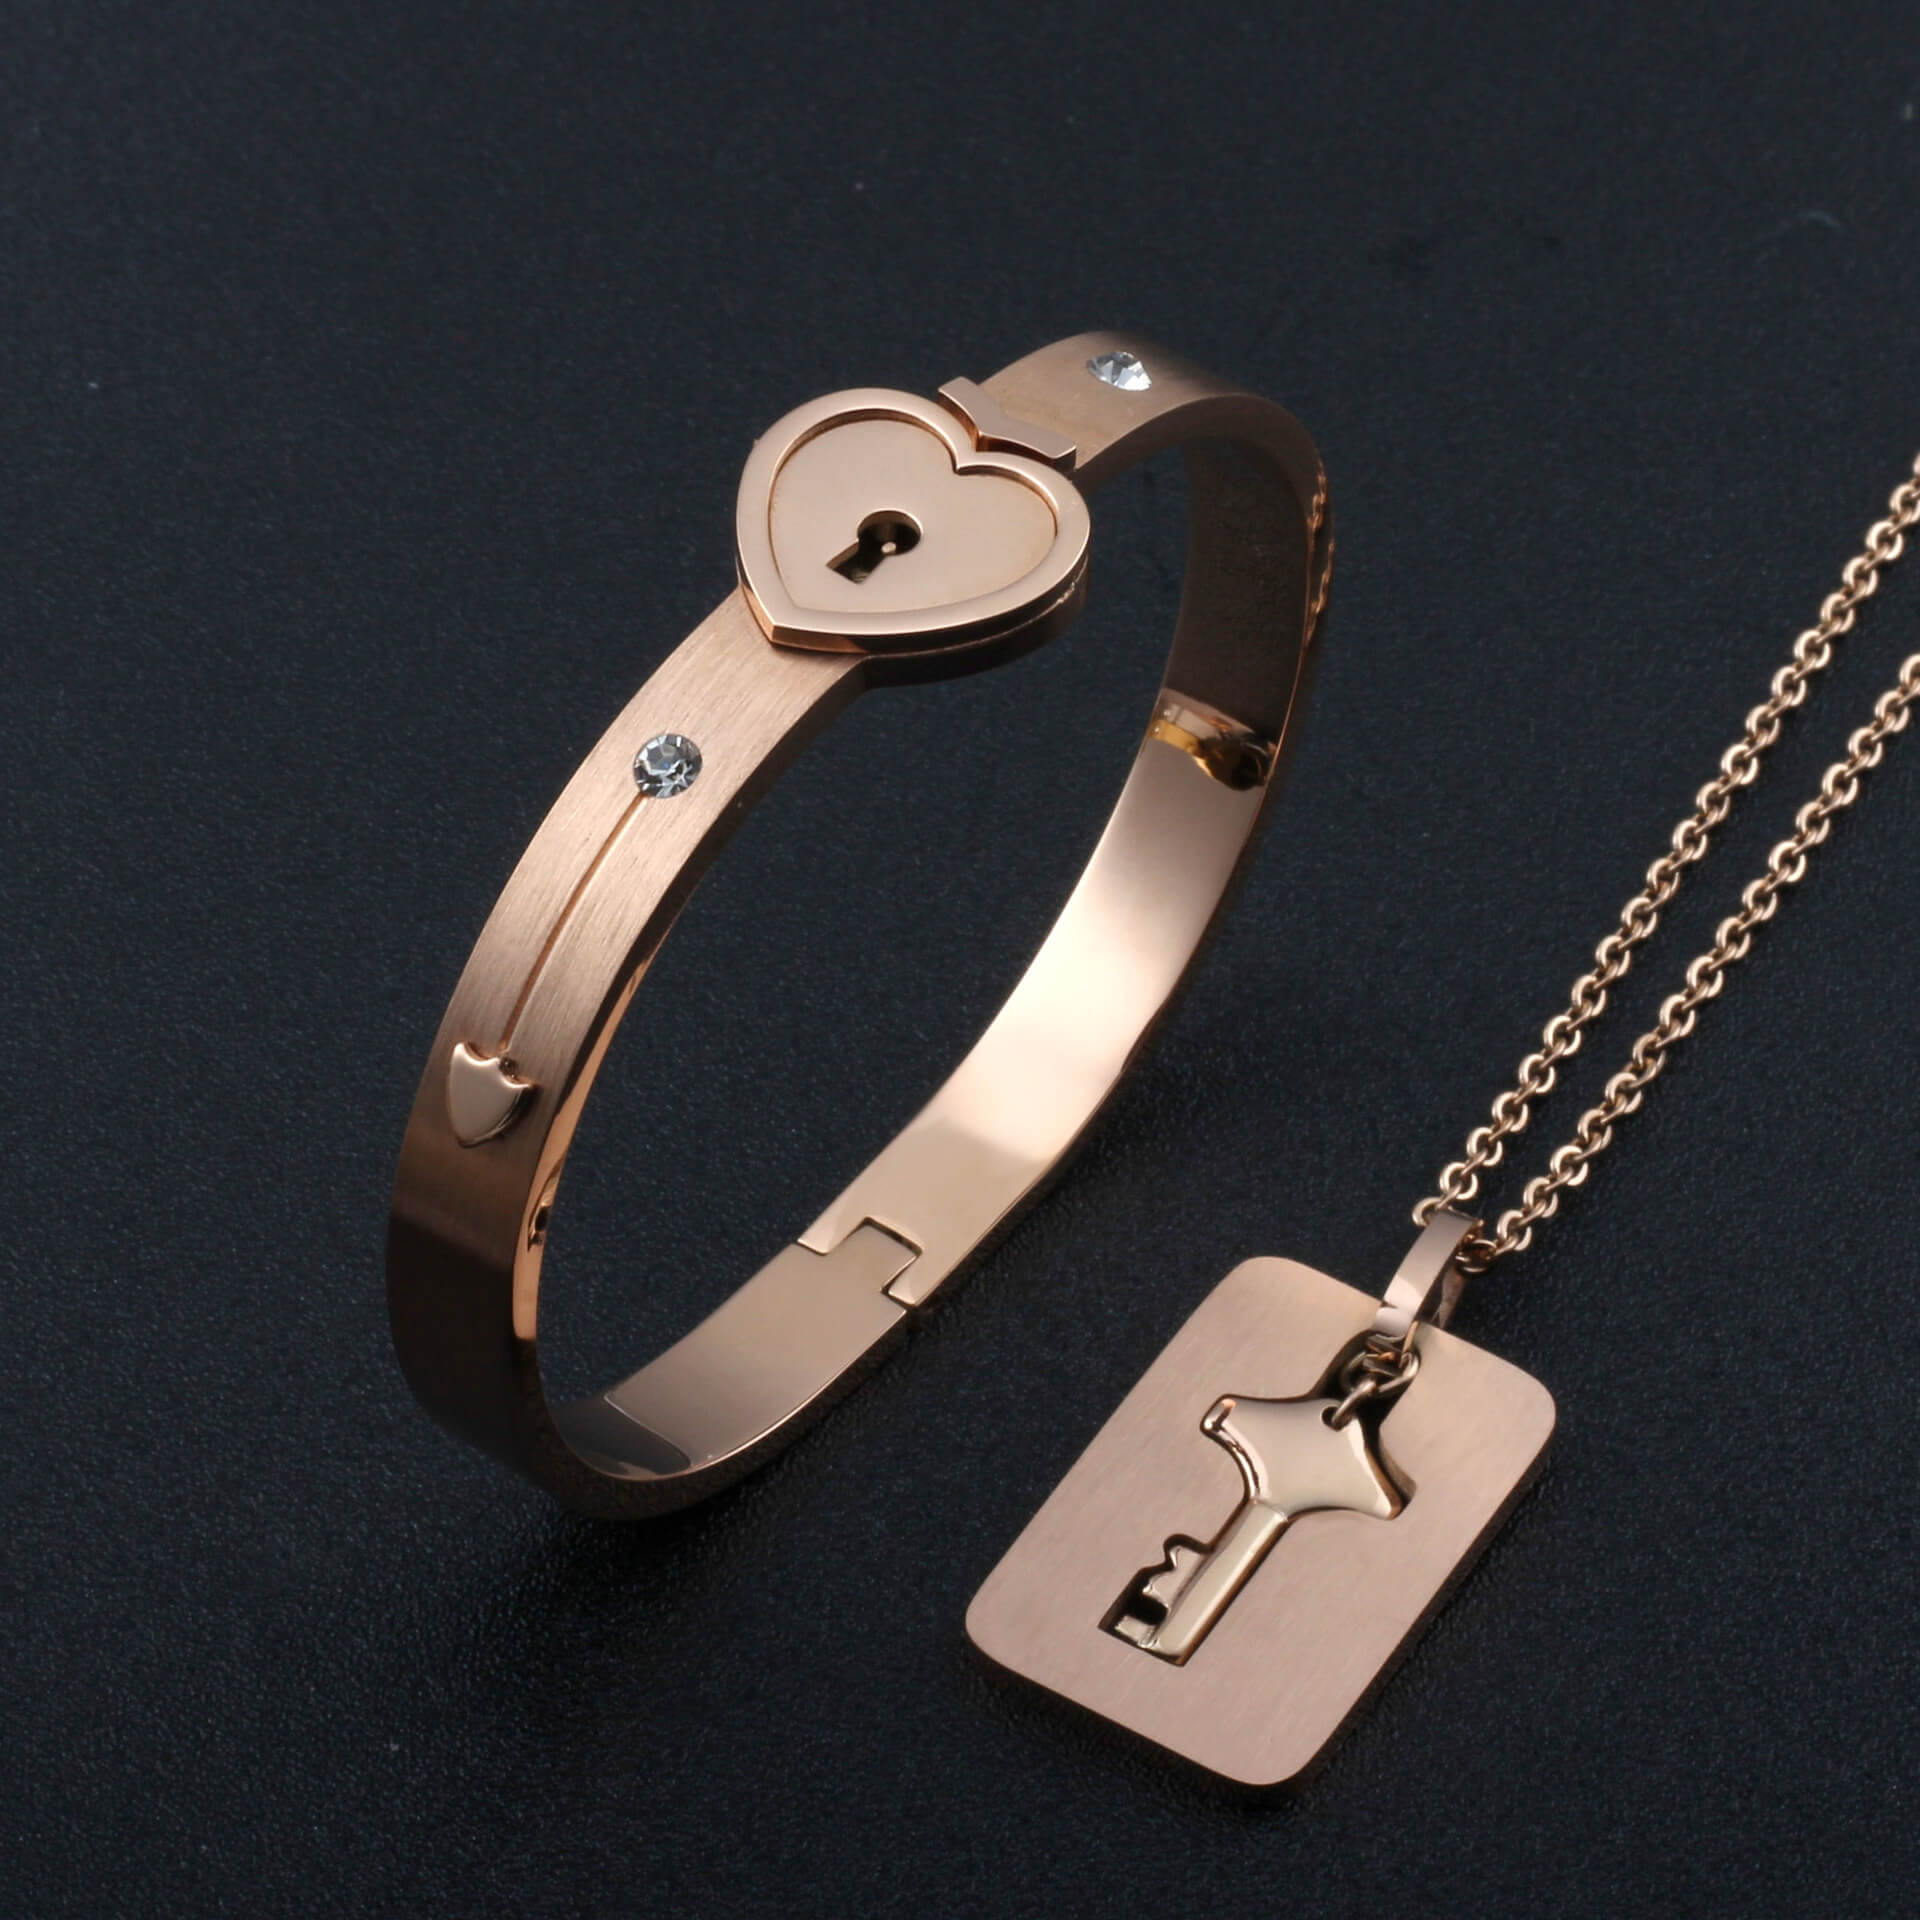 His Hers Love Heart Key Pendant Necklace&Lock Bangle Bracelet Set in Gold | One Size